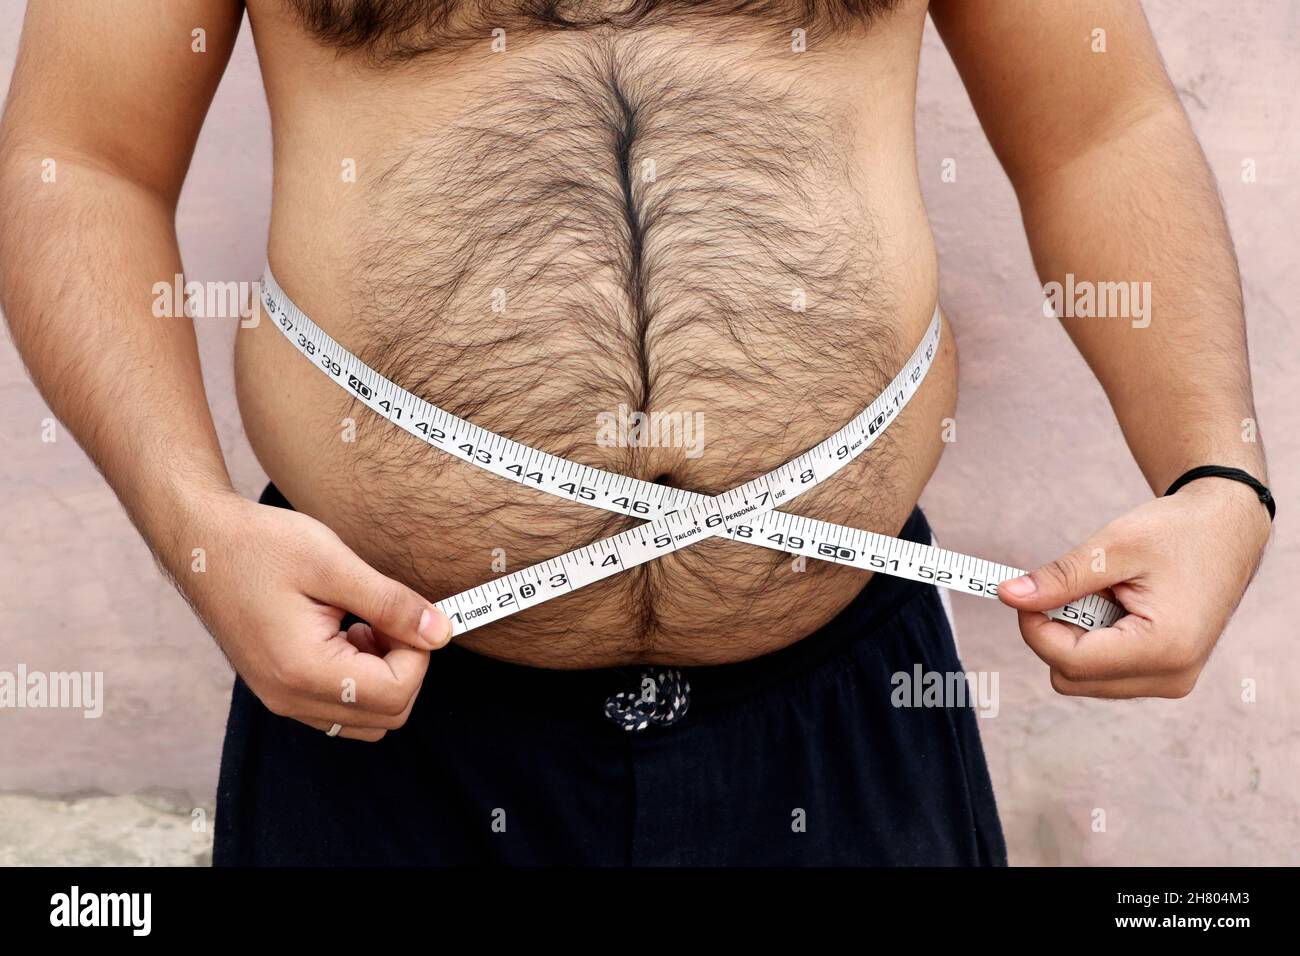 A asian men measures his fat belly with a measuring tape on a plain background Stock Photo